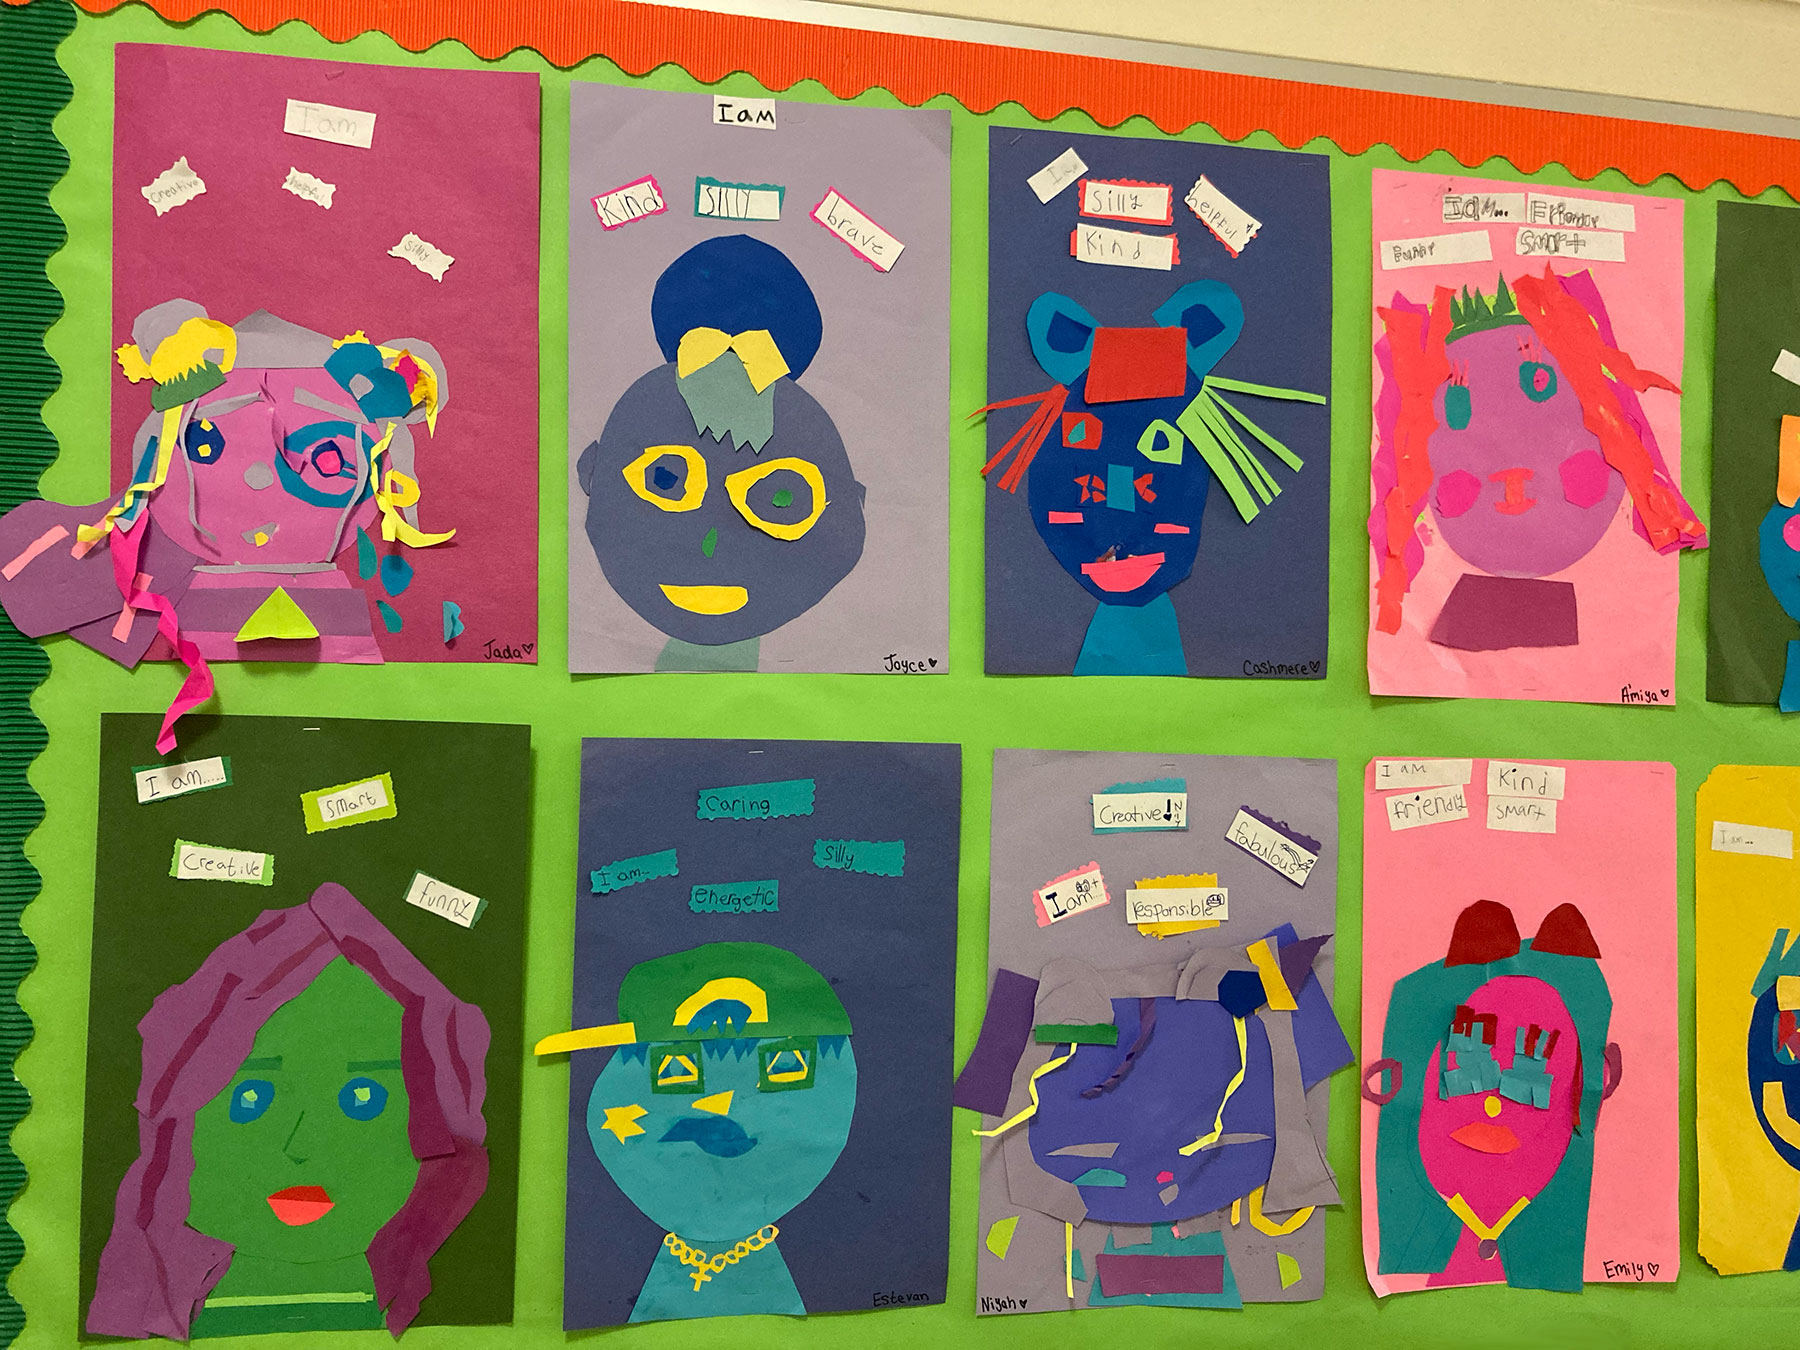 Display of collage portraits by students in elementary classroom